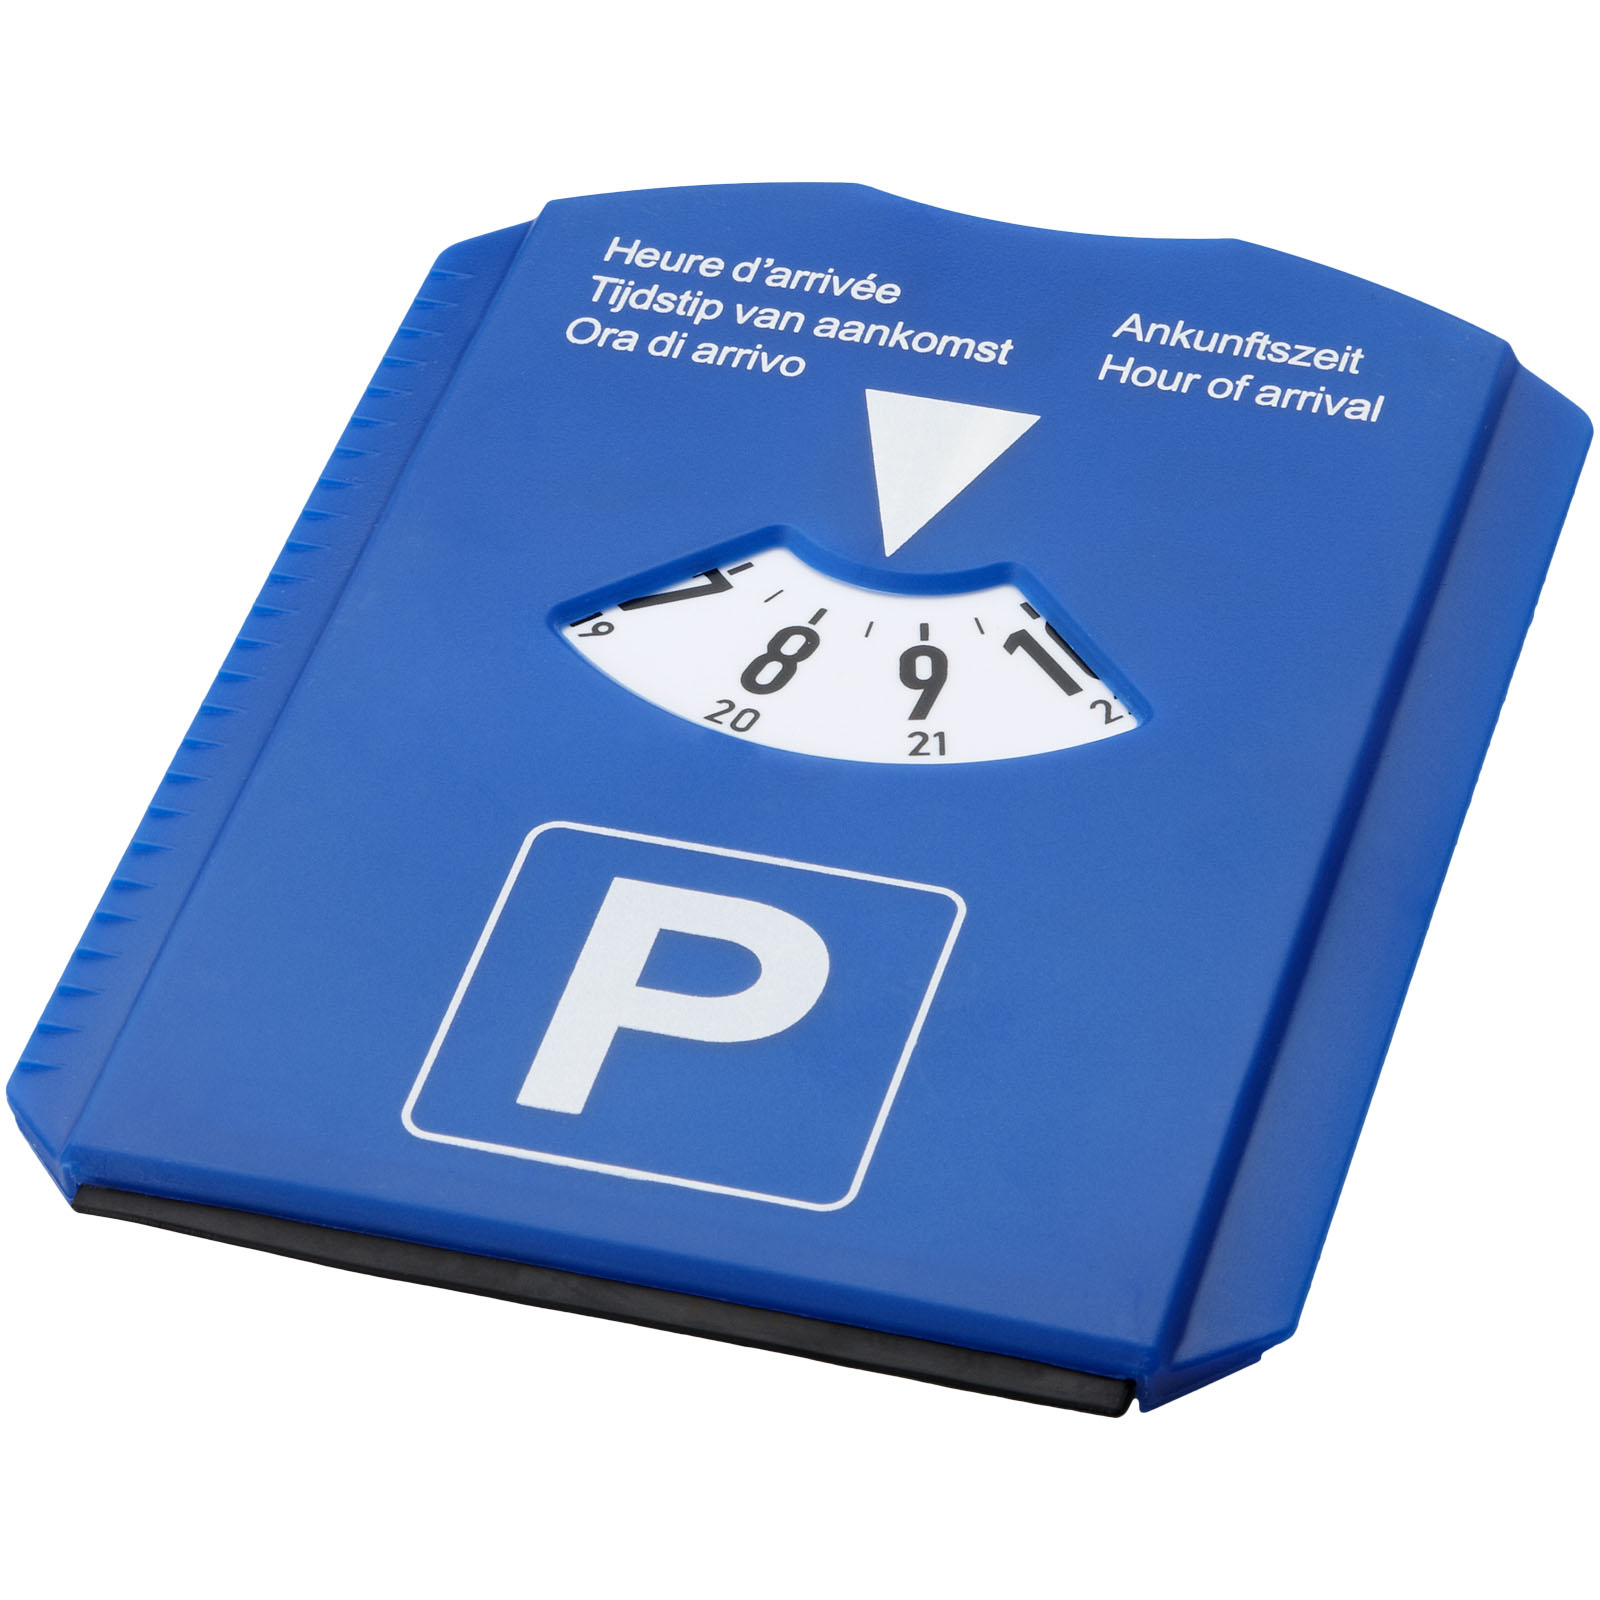 Tools & Car Accessories - Spot 5-in-1 parking disc